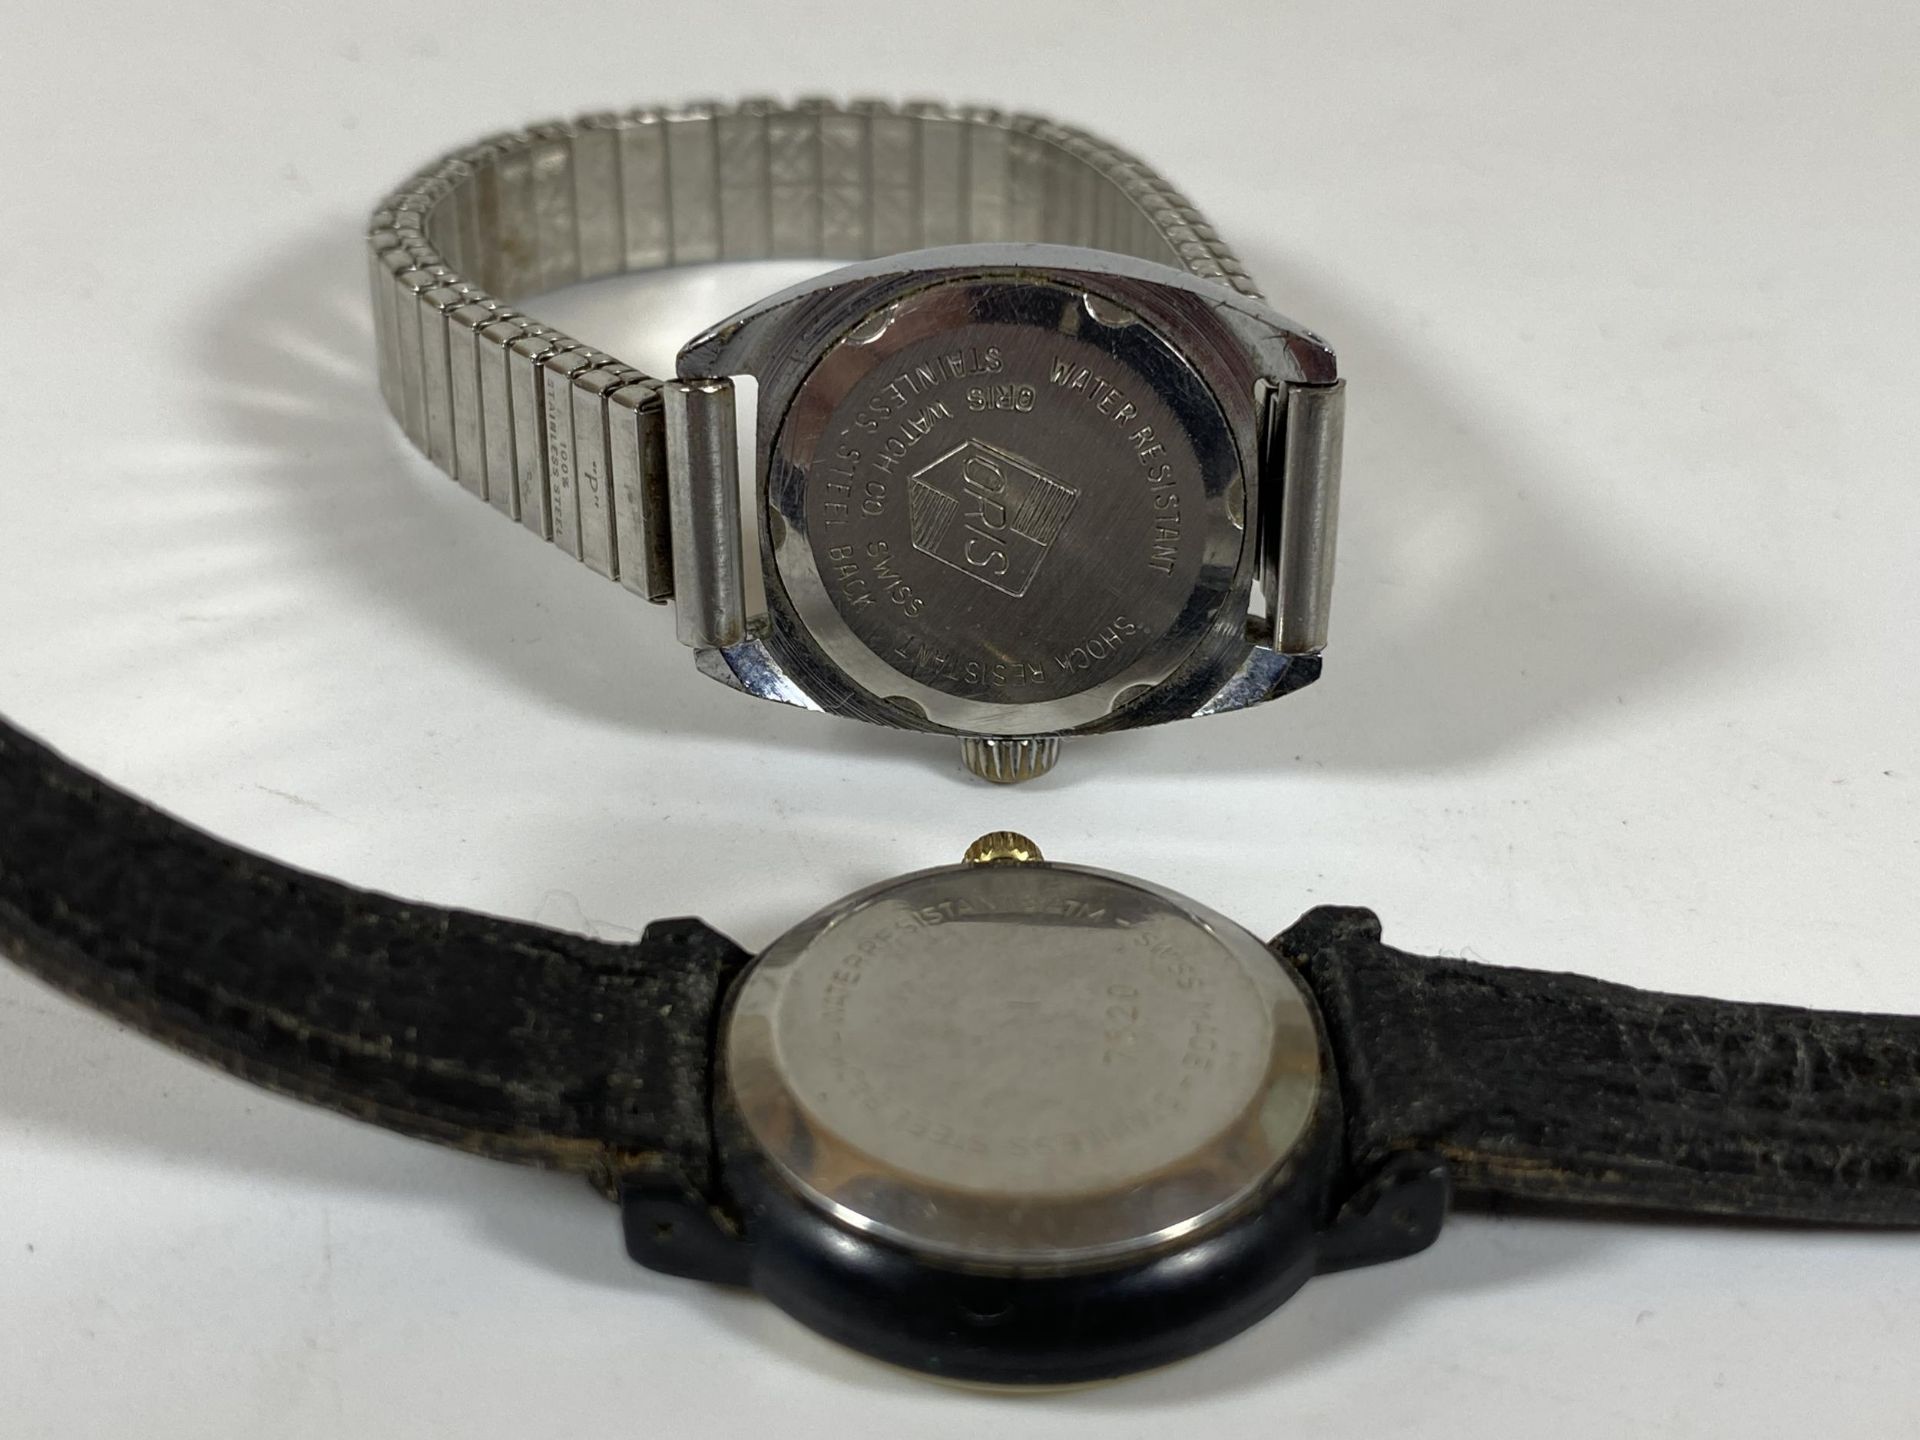 TWO VINTAGE LADIES WATCHES - 1960'S ORIS WITH RED SECOND WATCH & AVIA FREESTYLE QYARTZ DATE